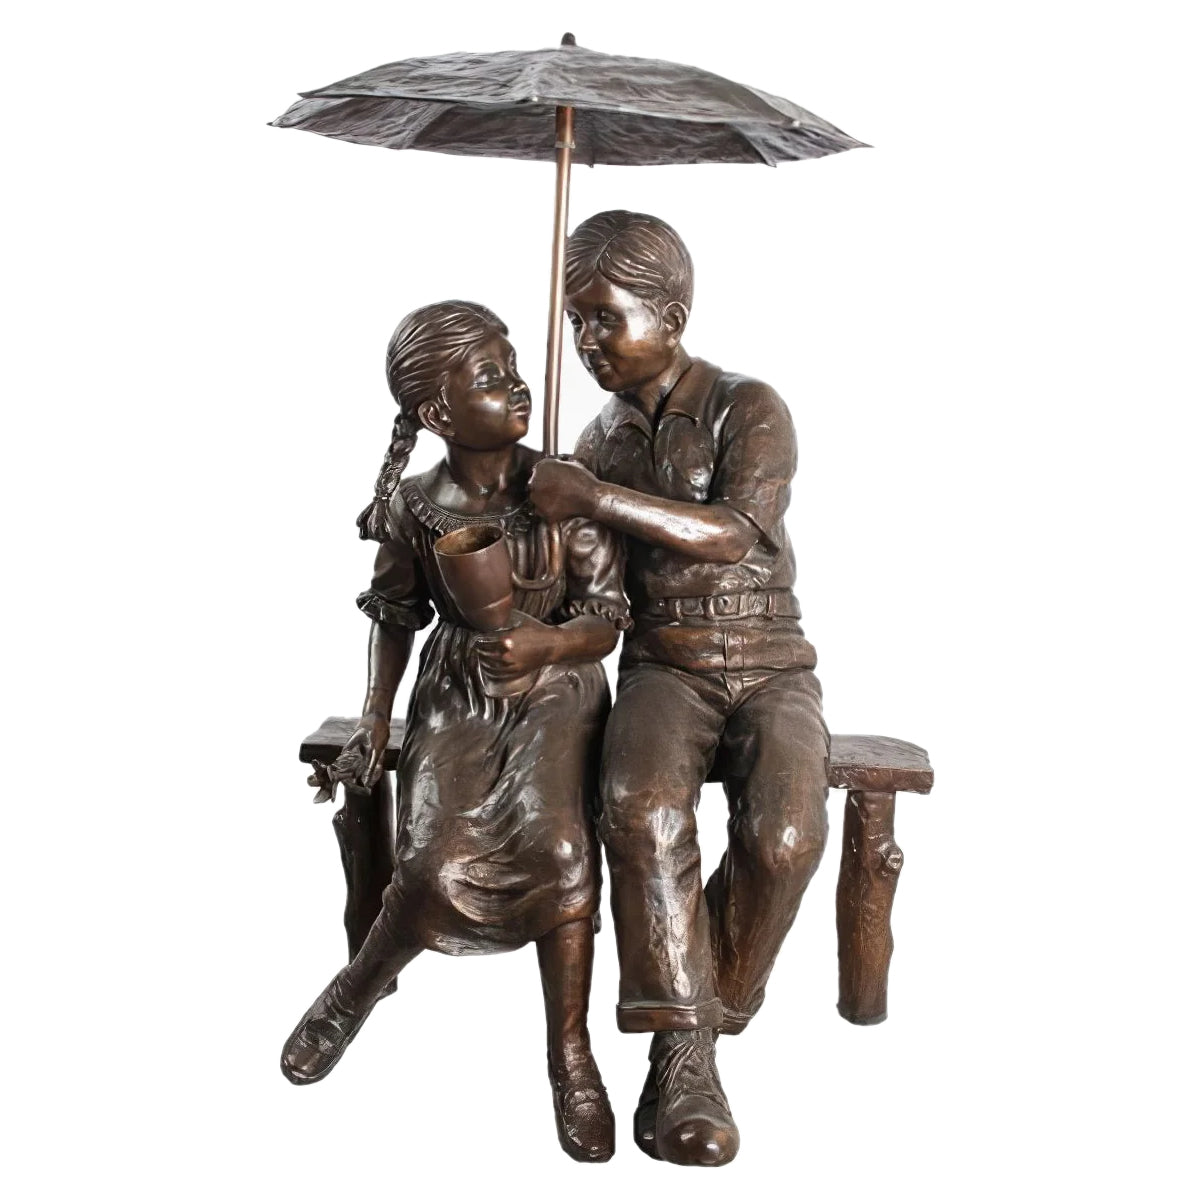 Bronze Boy and Girl on Bench with Umbrella Sculpture